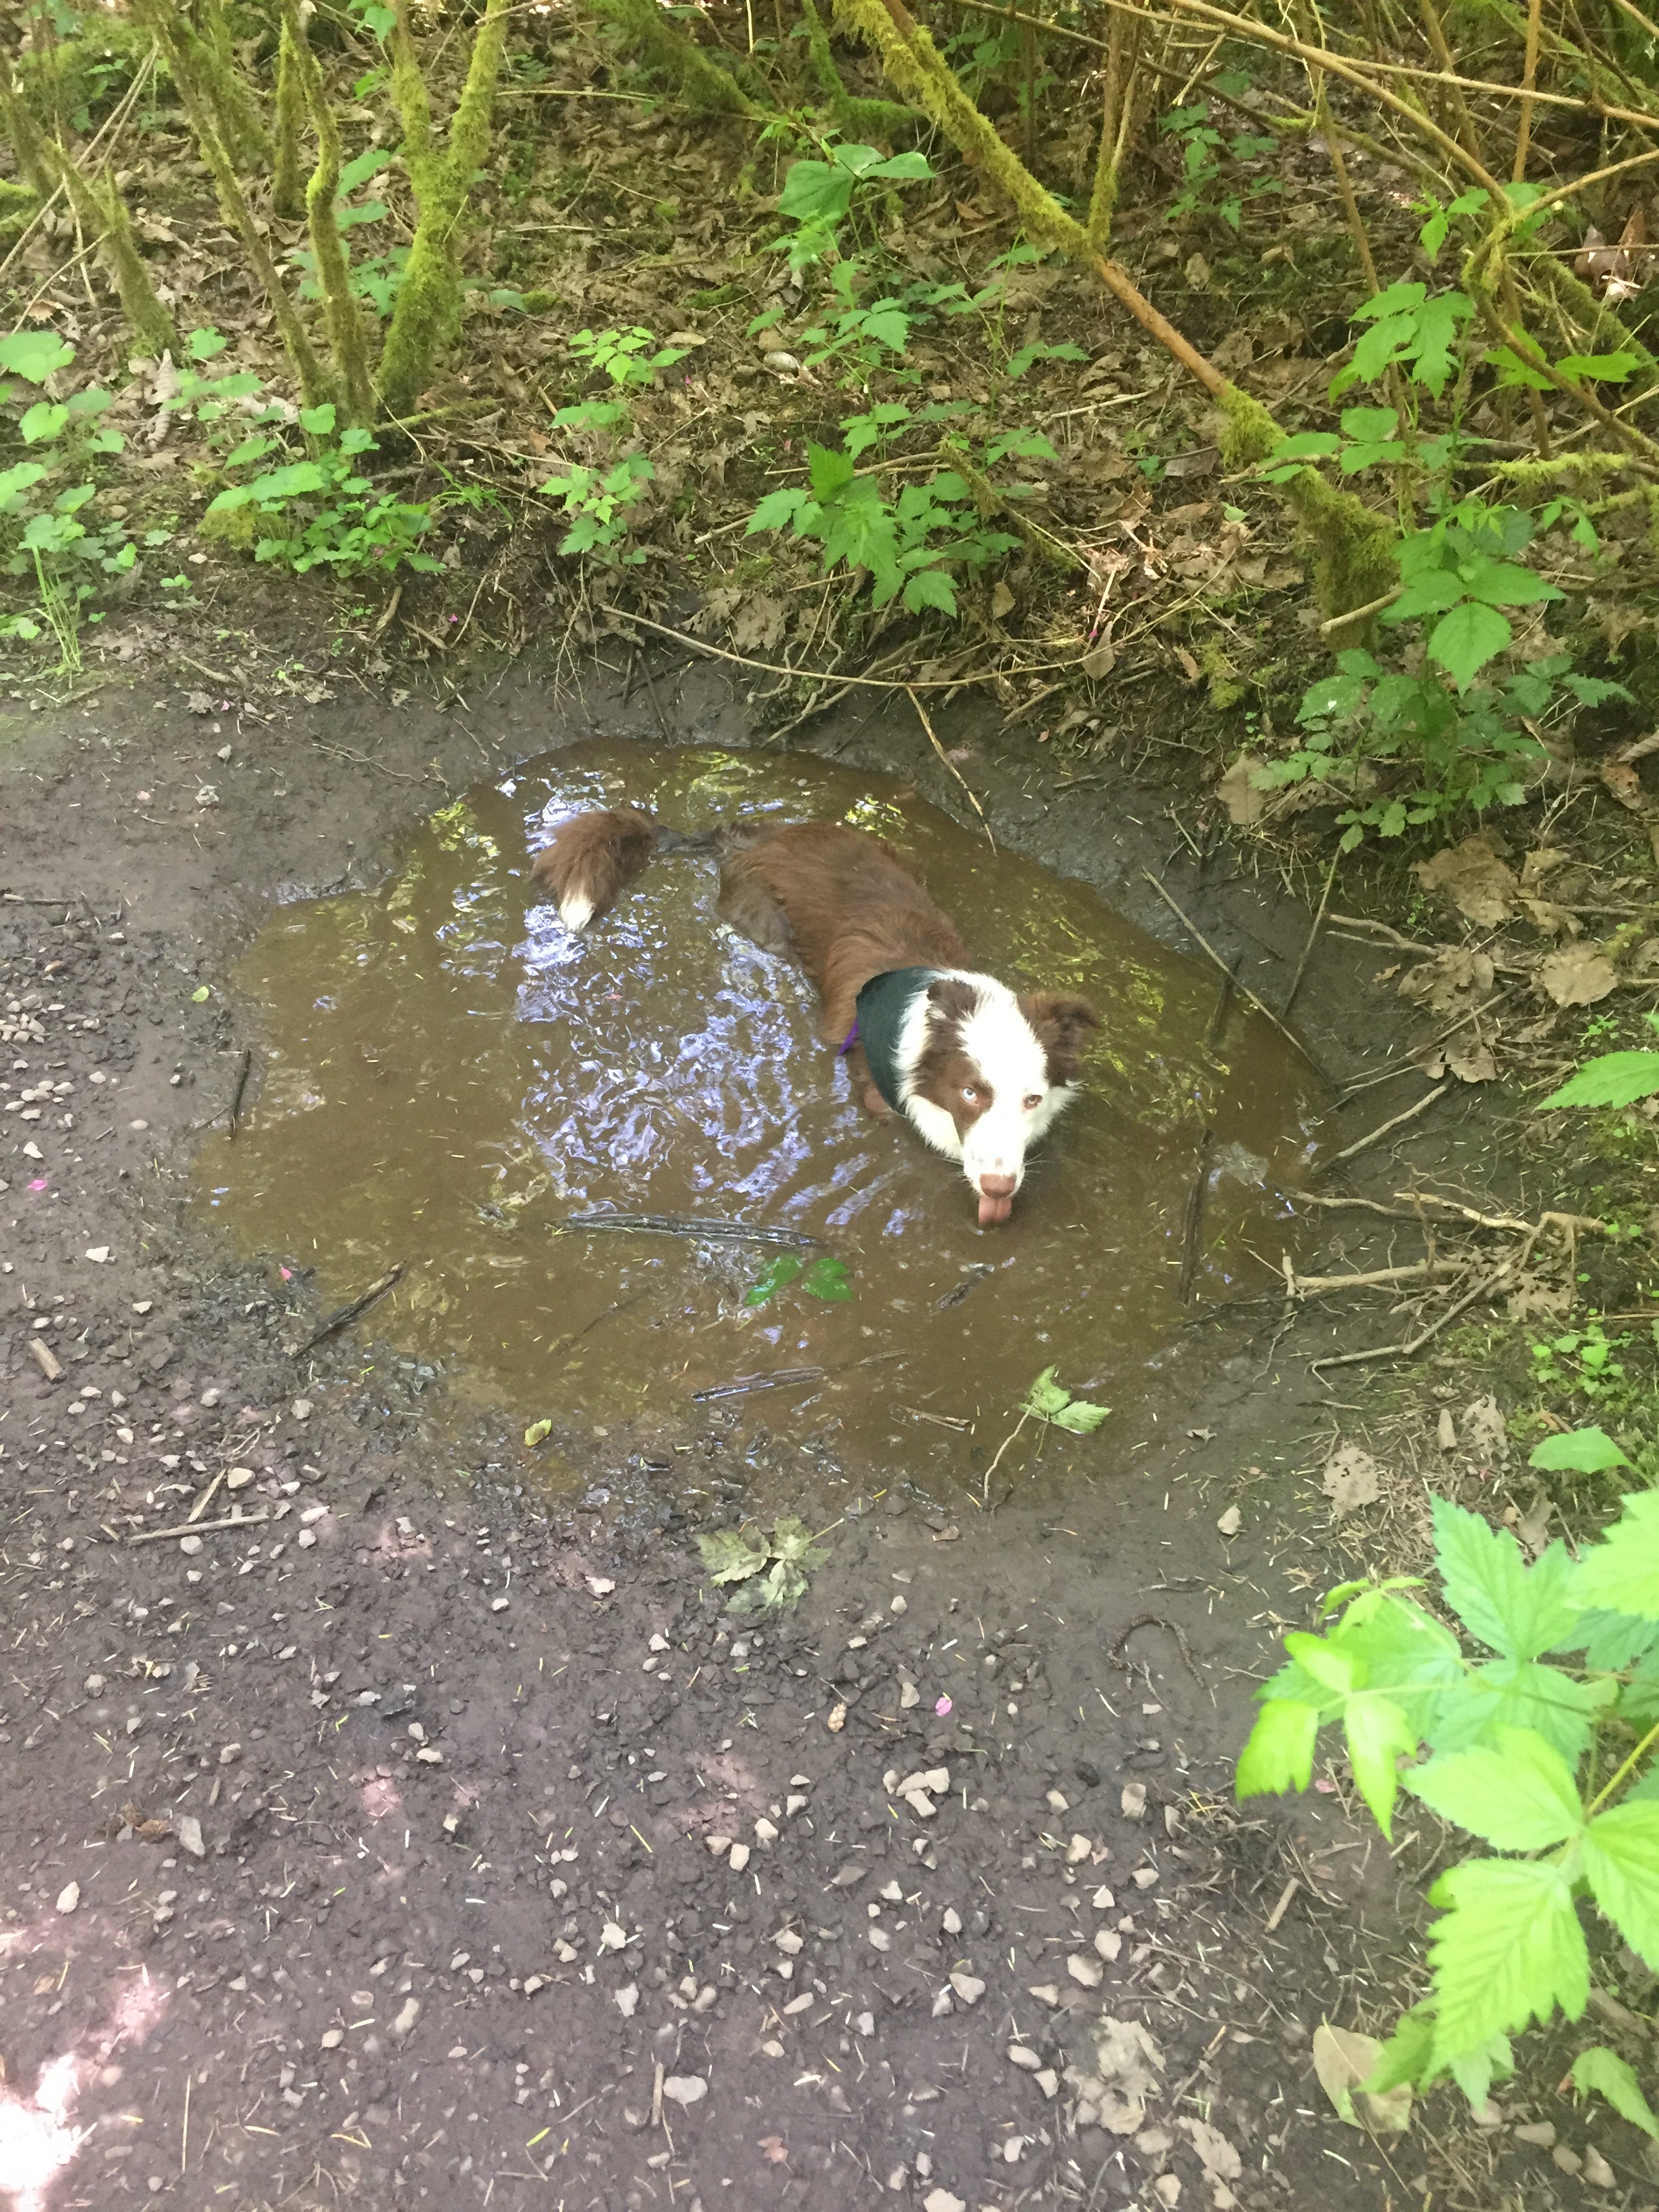 On a trail run! Nala got hot so she decided to submerge herself in a nice little puddle.